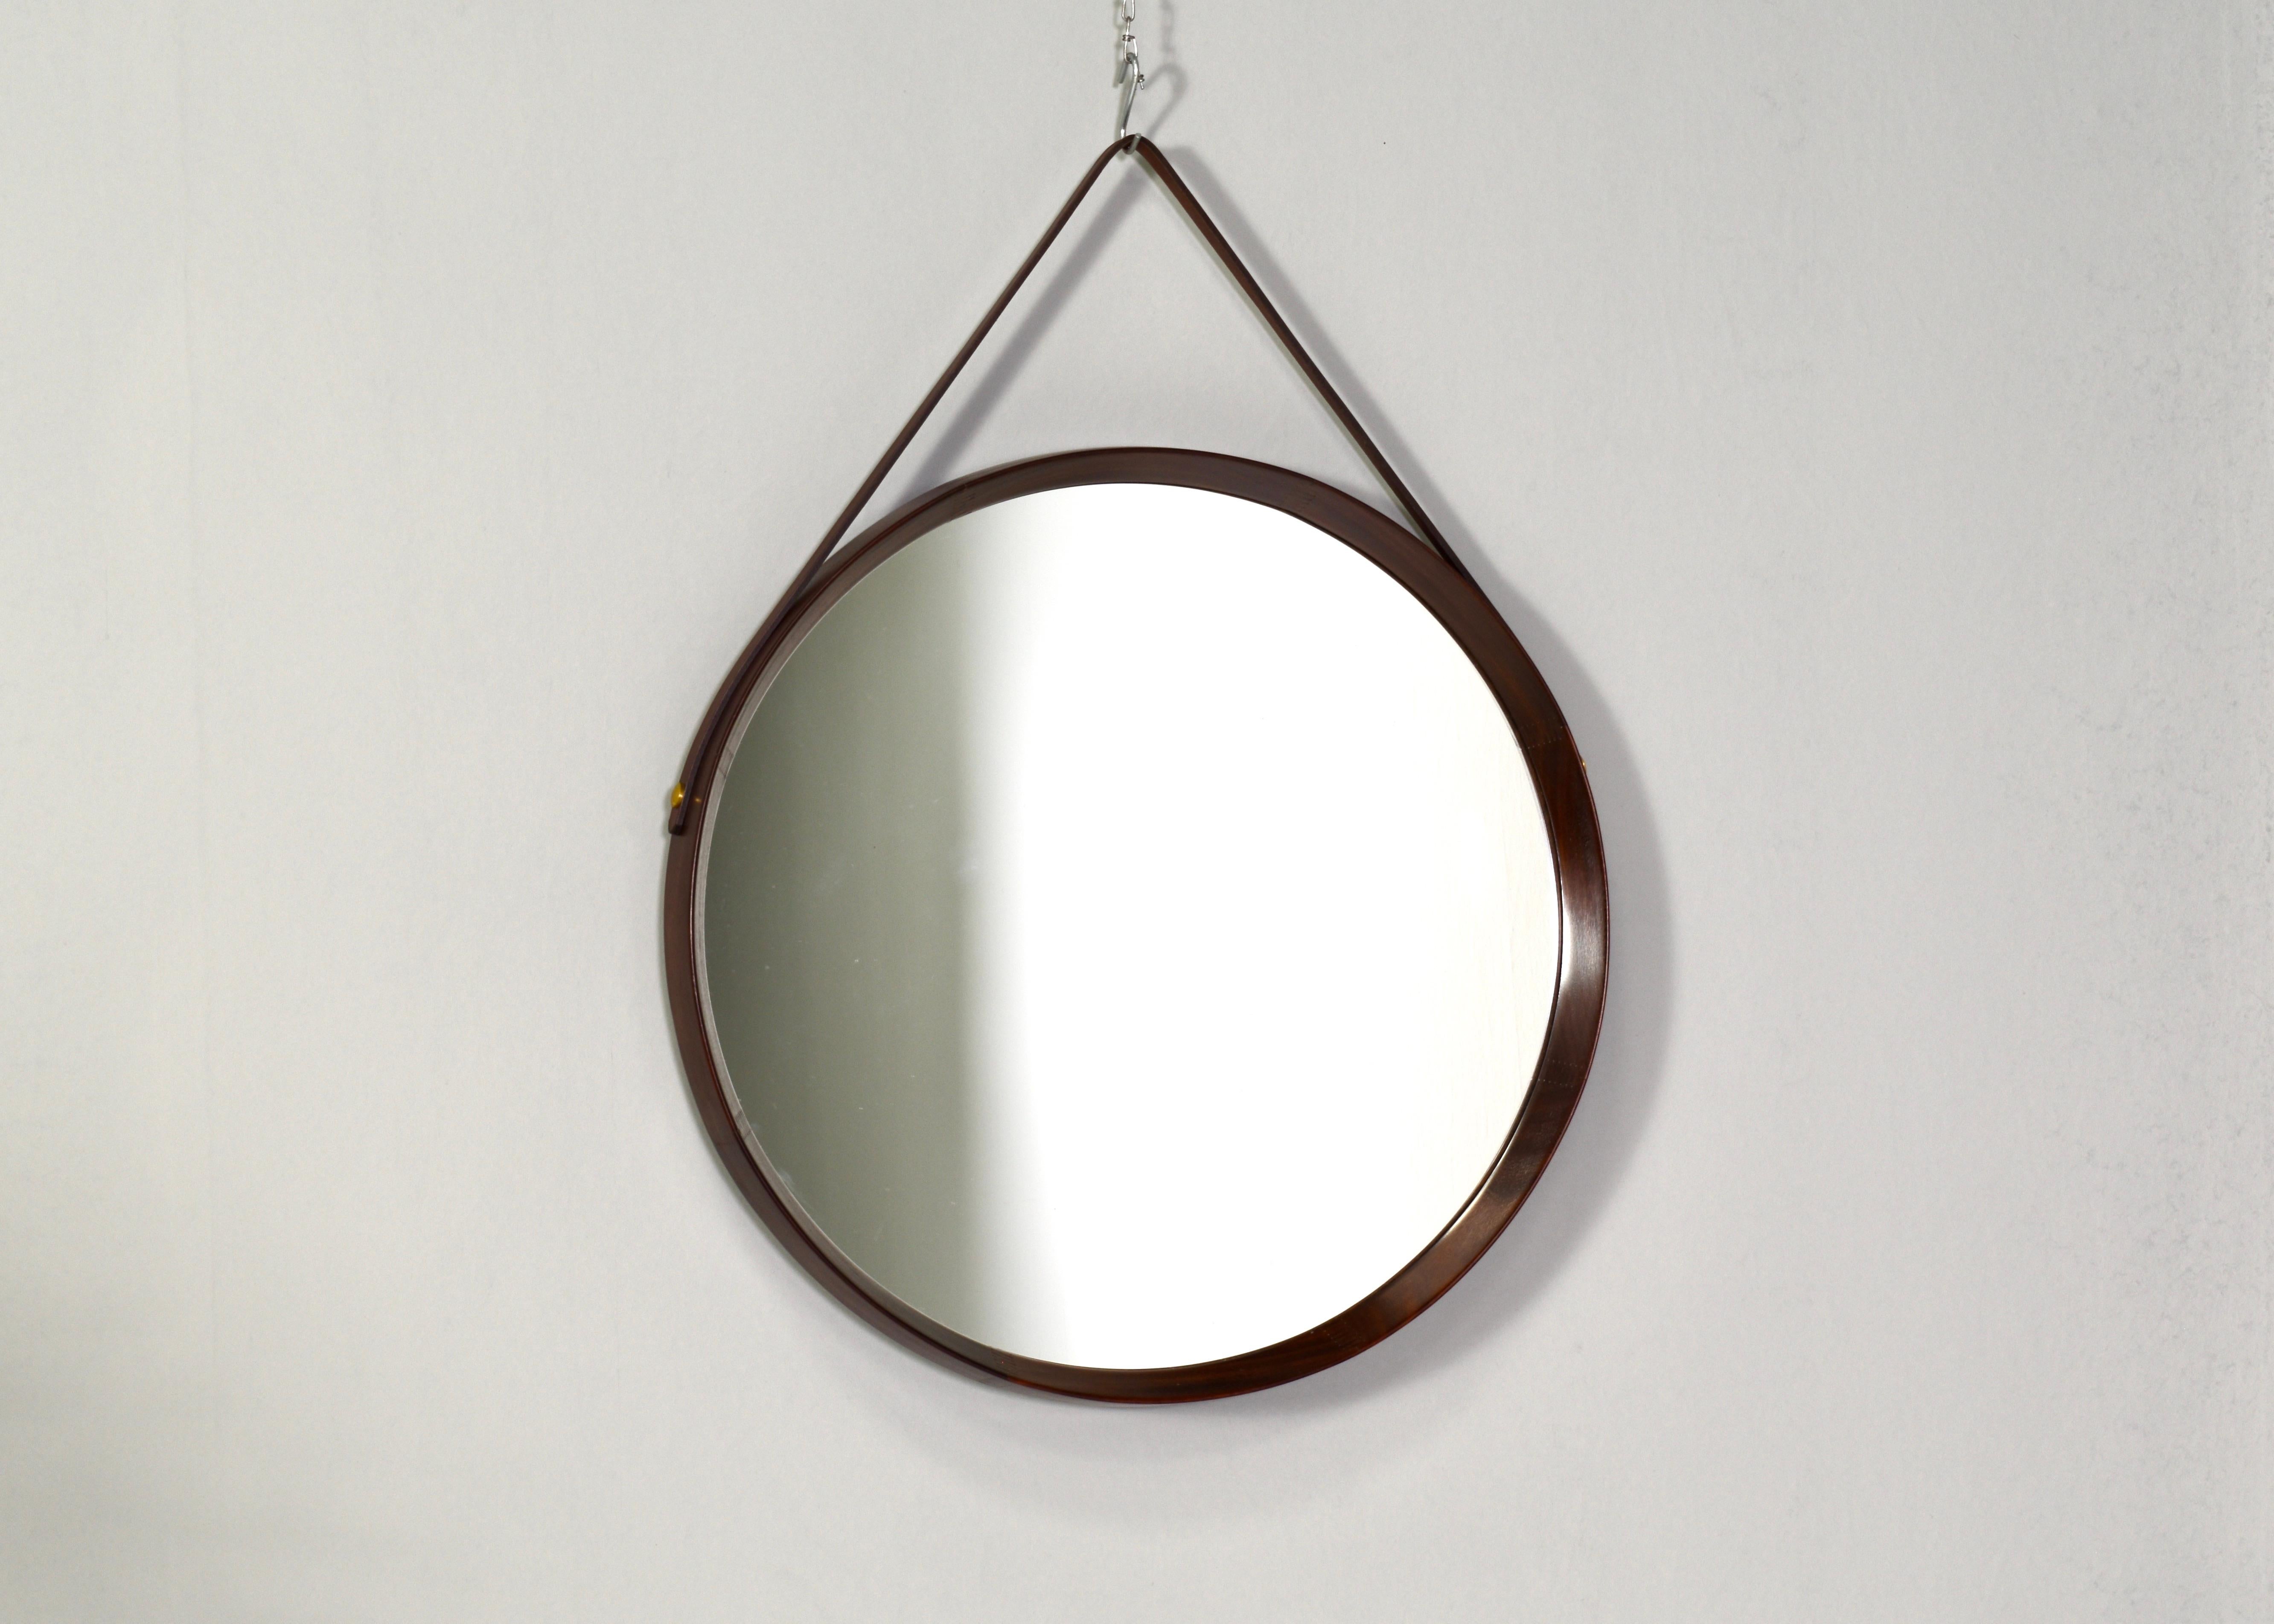 Round Italian teak mirror – 1950s. Amazing Italian design; the round tapered edge is made out of one piece of solid teak wood. The mounting strap is made of leather and is attached with brass screws. In very good condition.

Designer: